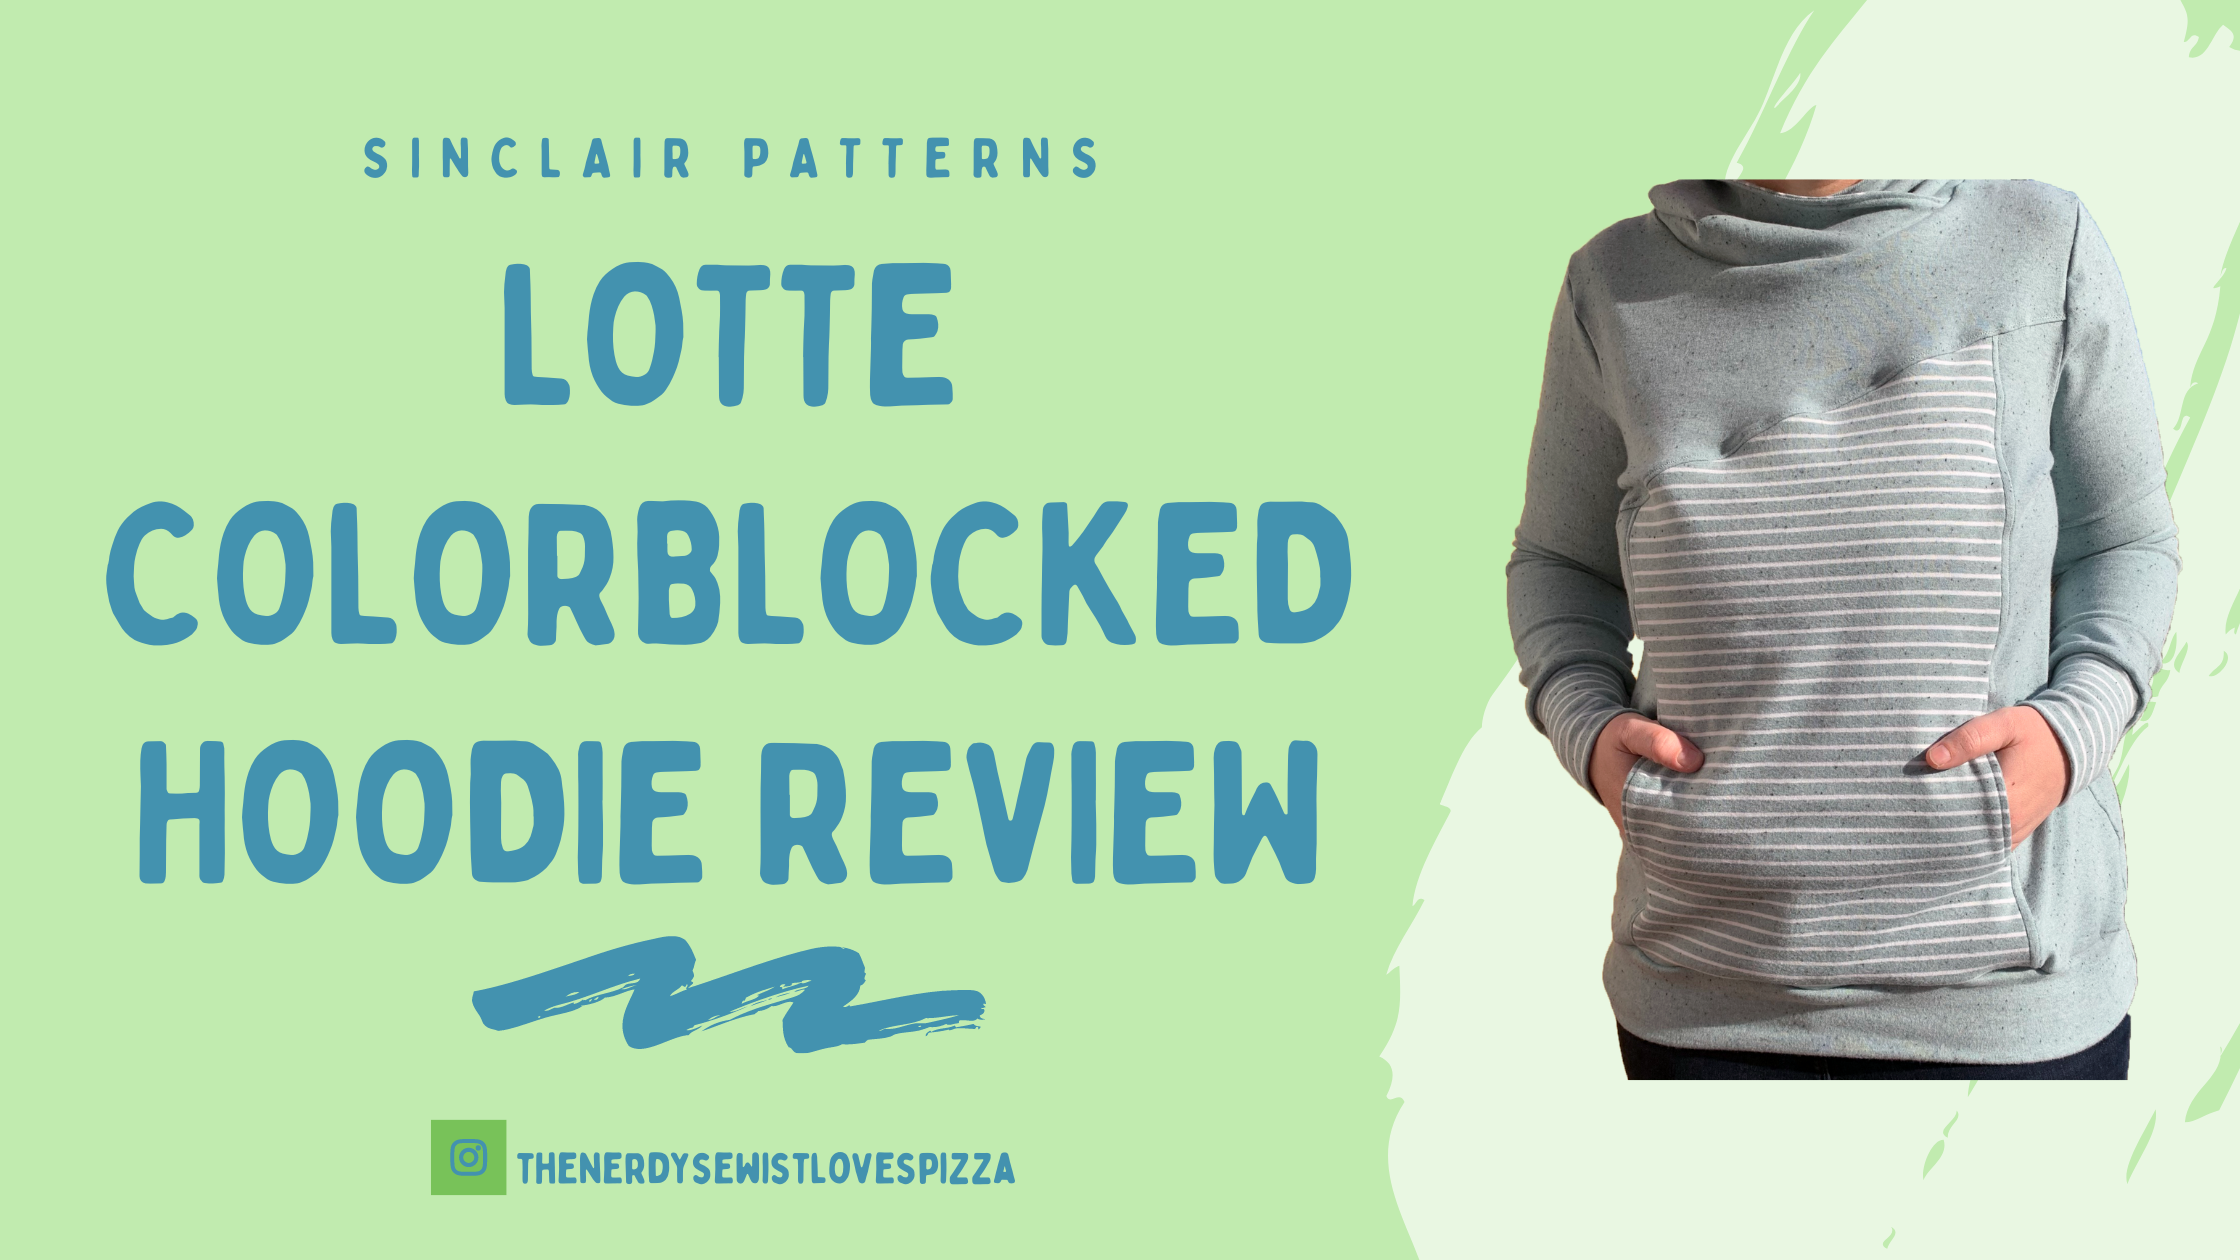 Sinclair Patterns - Lotte Colorblocked Hoodie Review - The Nerdy